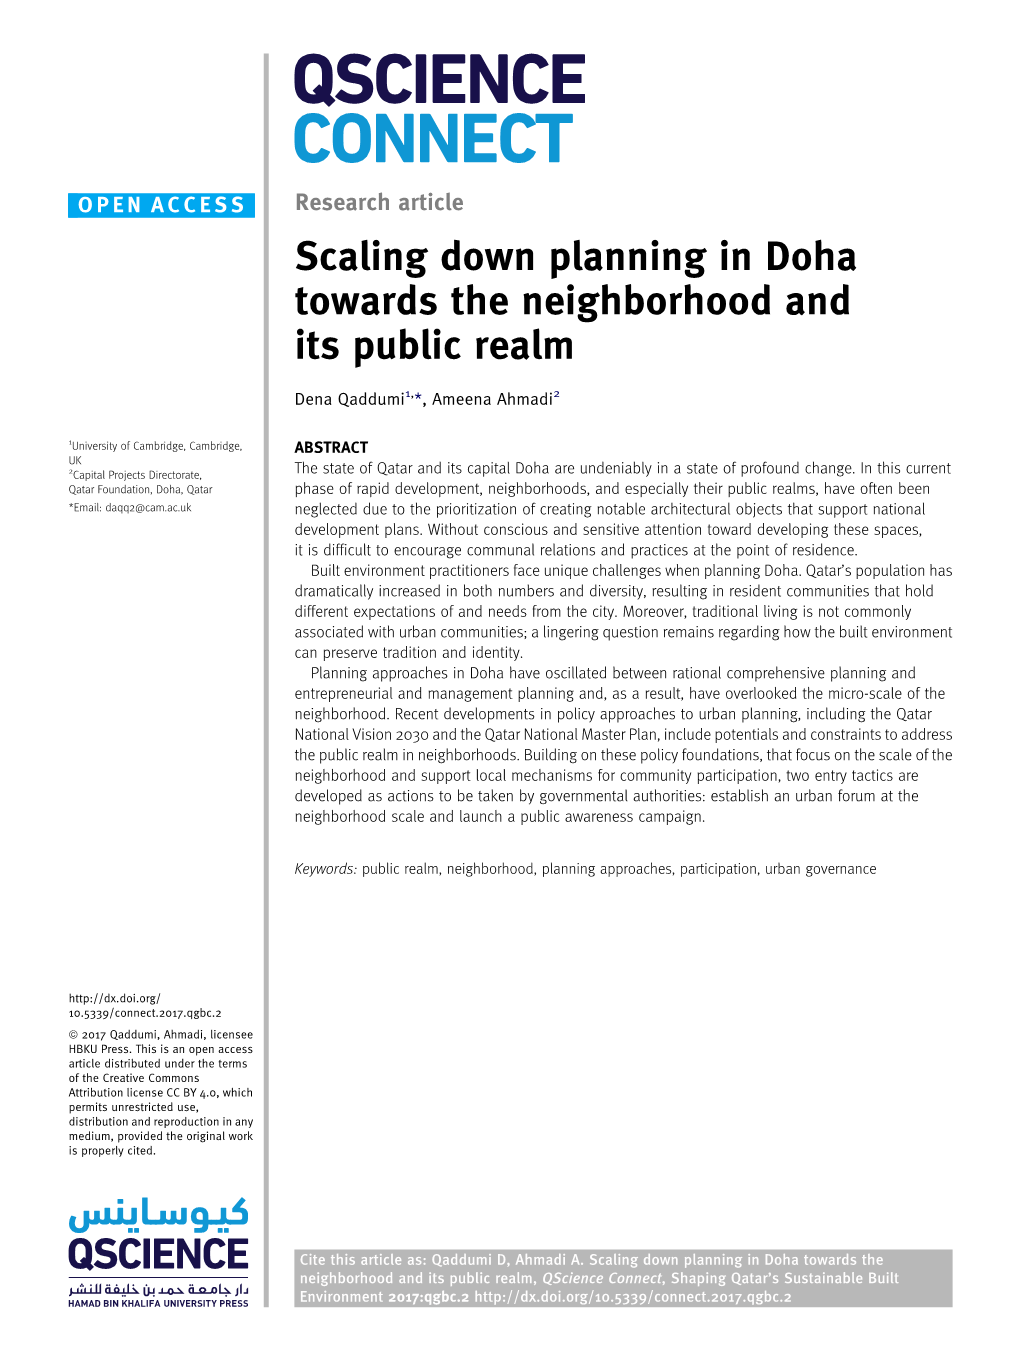 Scaling Down Planning in Doha Towards the Neighborhood and Its Public Realm